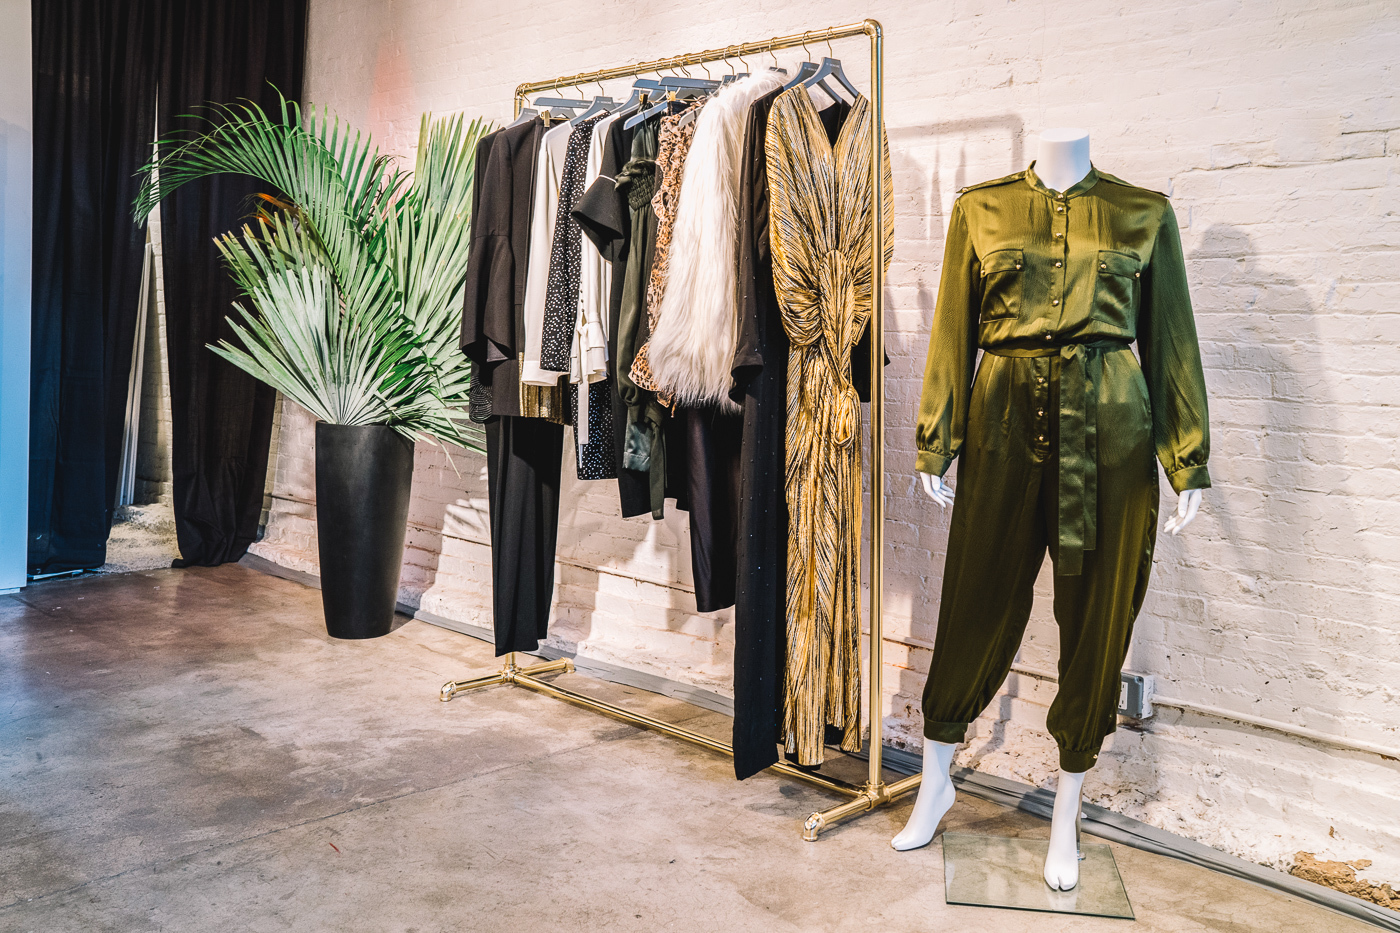 11 Honoré, pop up, how to build a pop up, New York pop up, things to see in New York, short-term retail